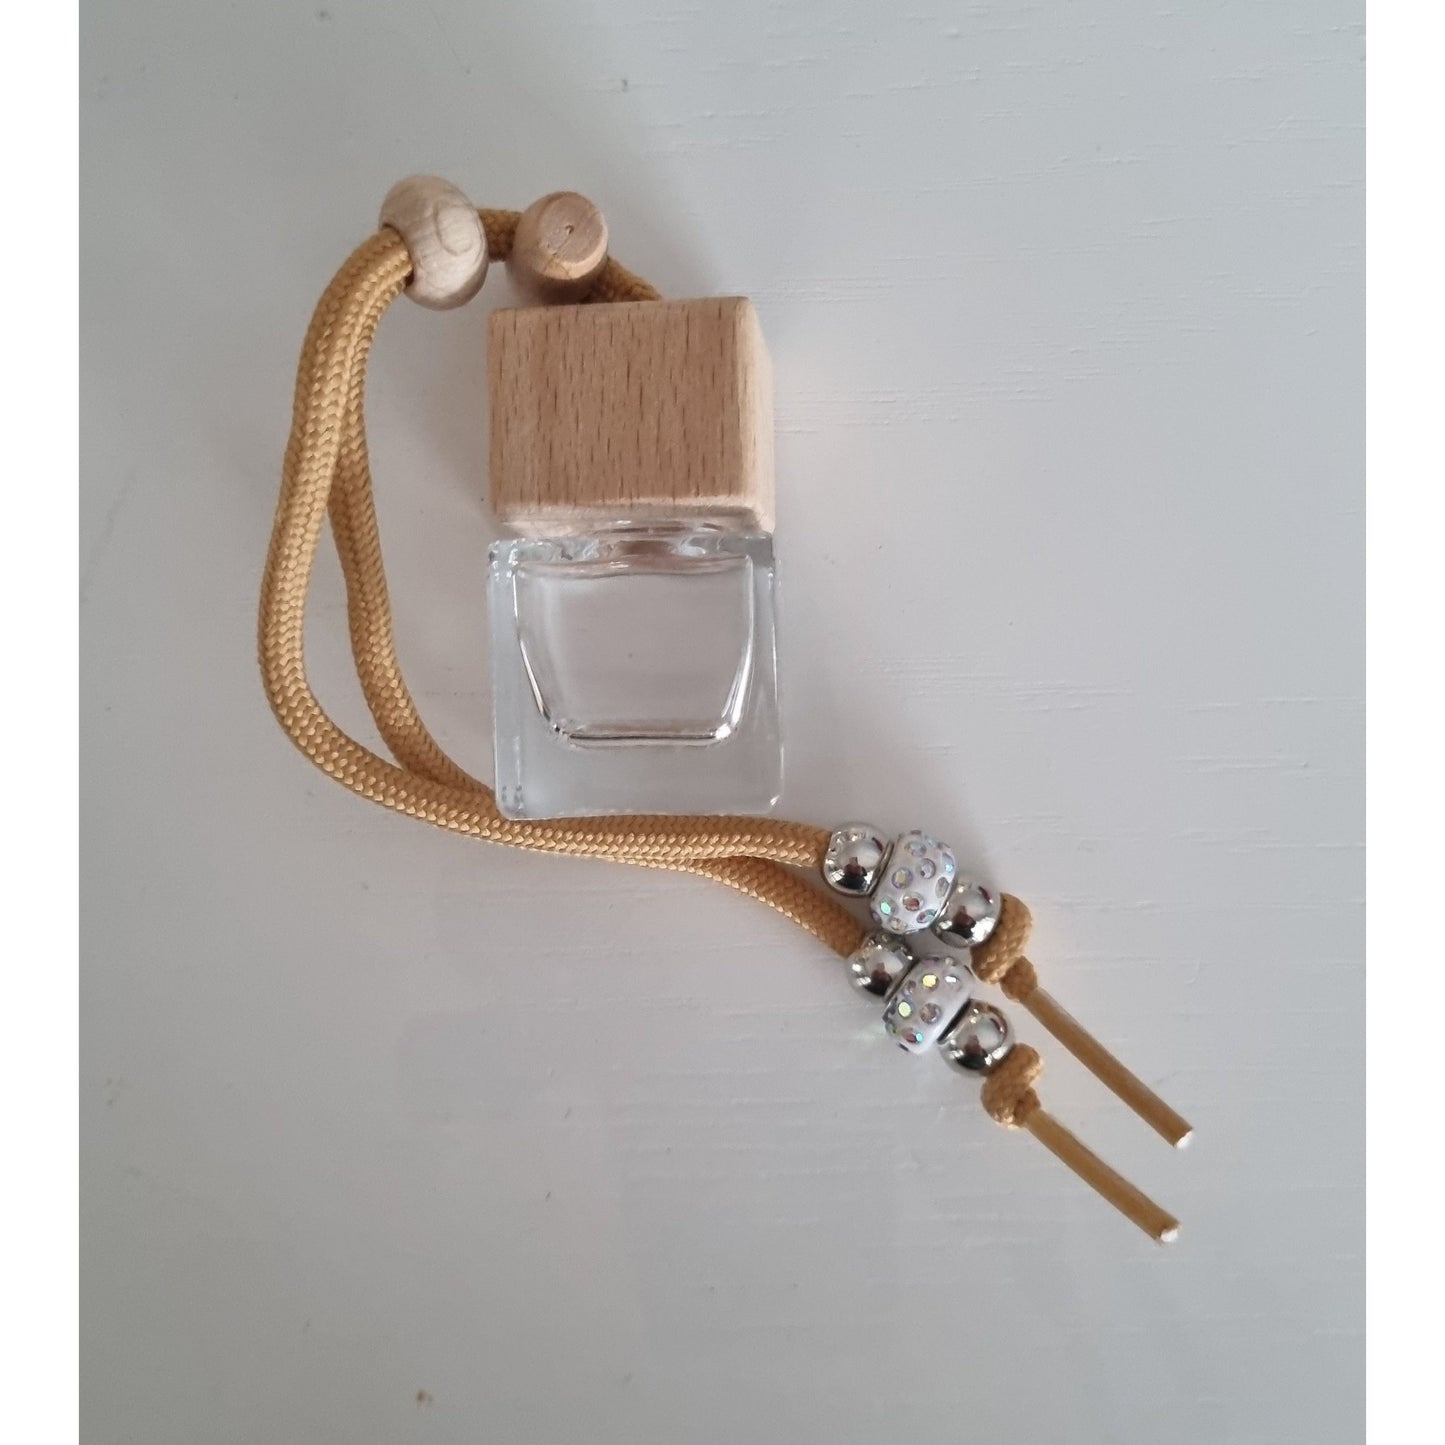 Car Diffuser with your choice of Fragrance Oil